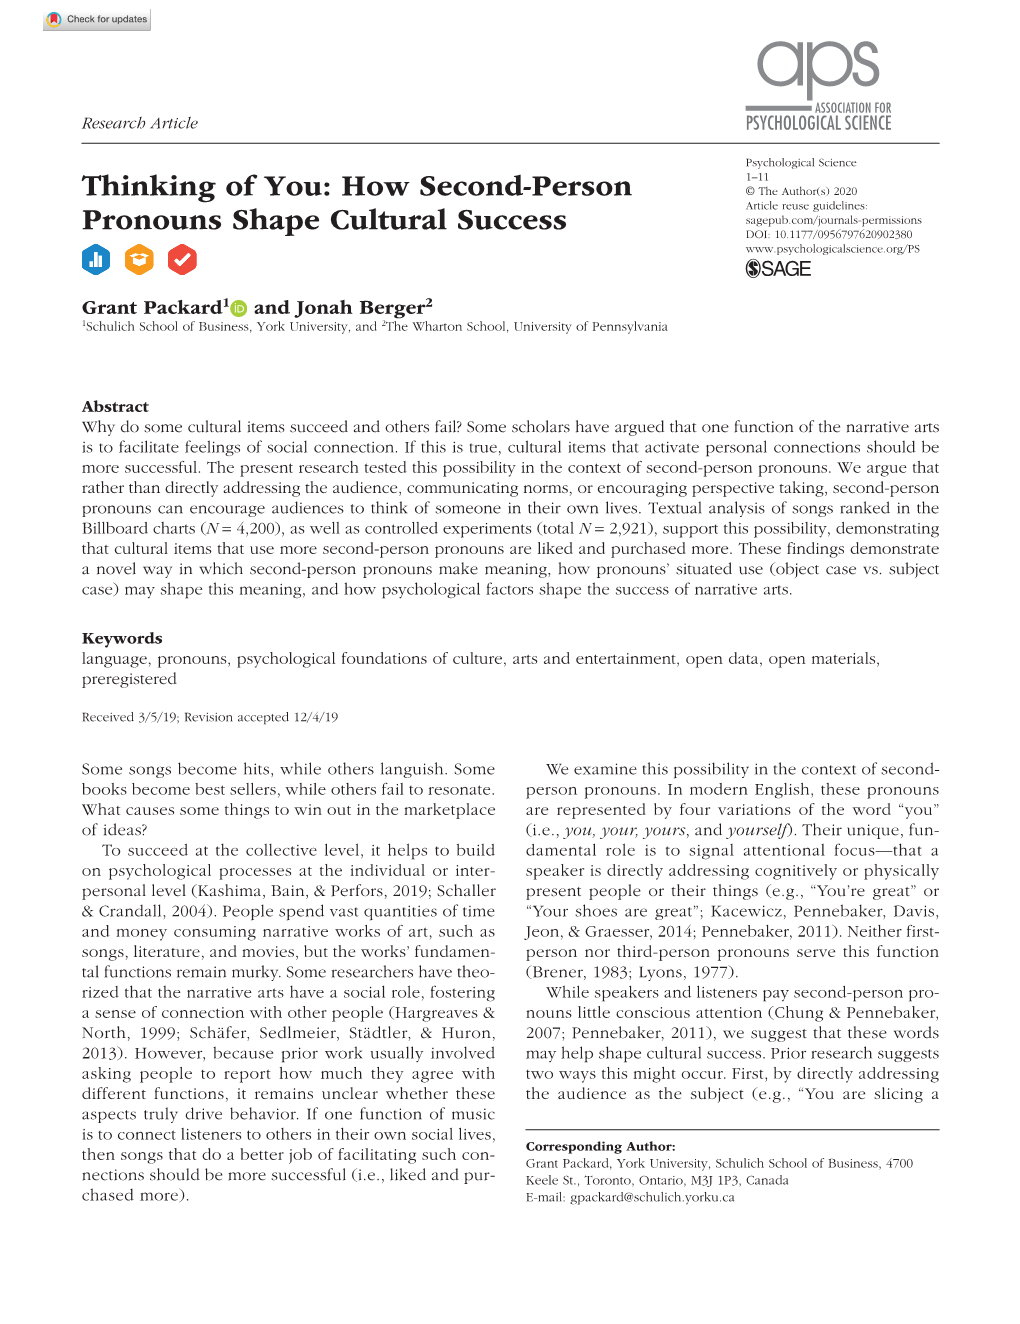 Thinking of You: How Second-Person Pronouns Shape Cultural Success